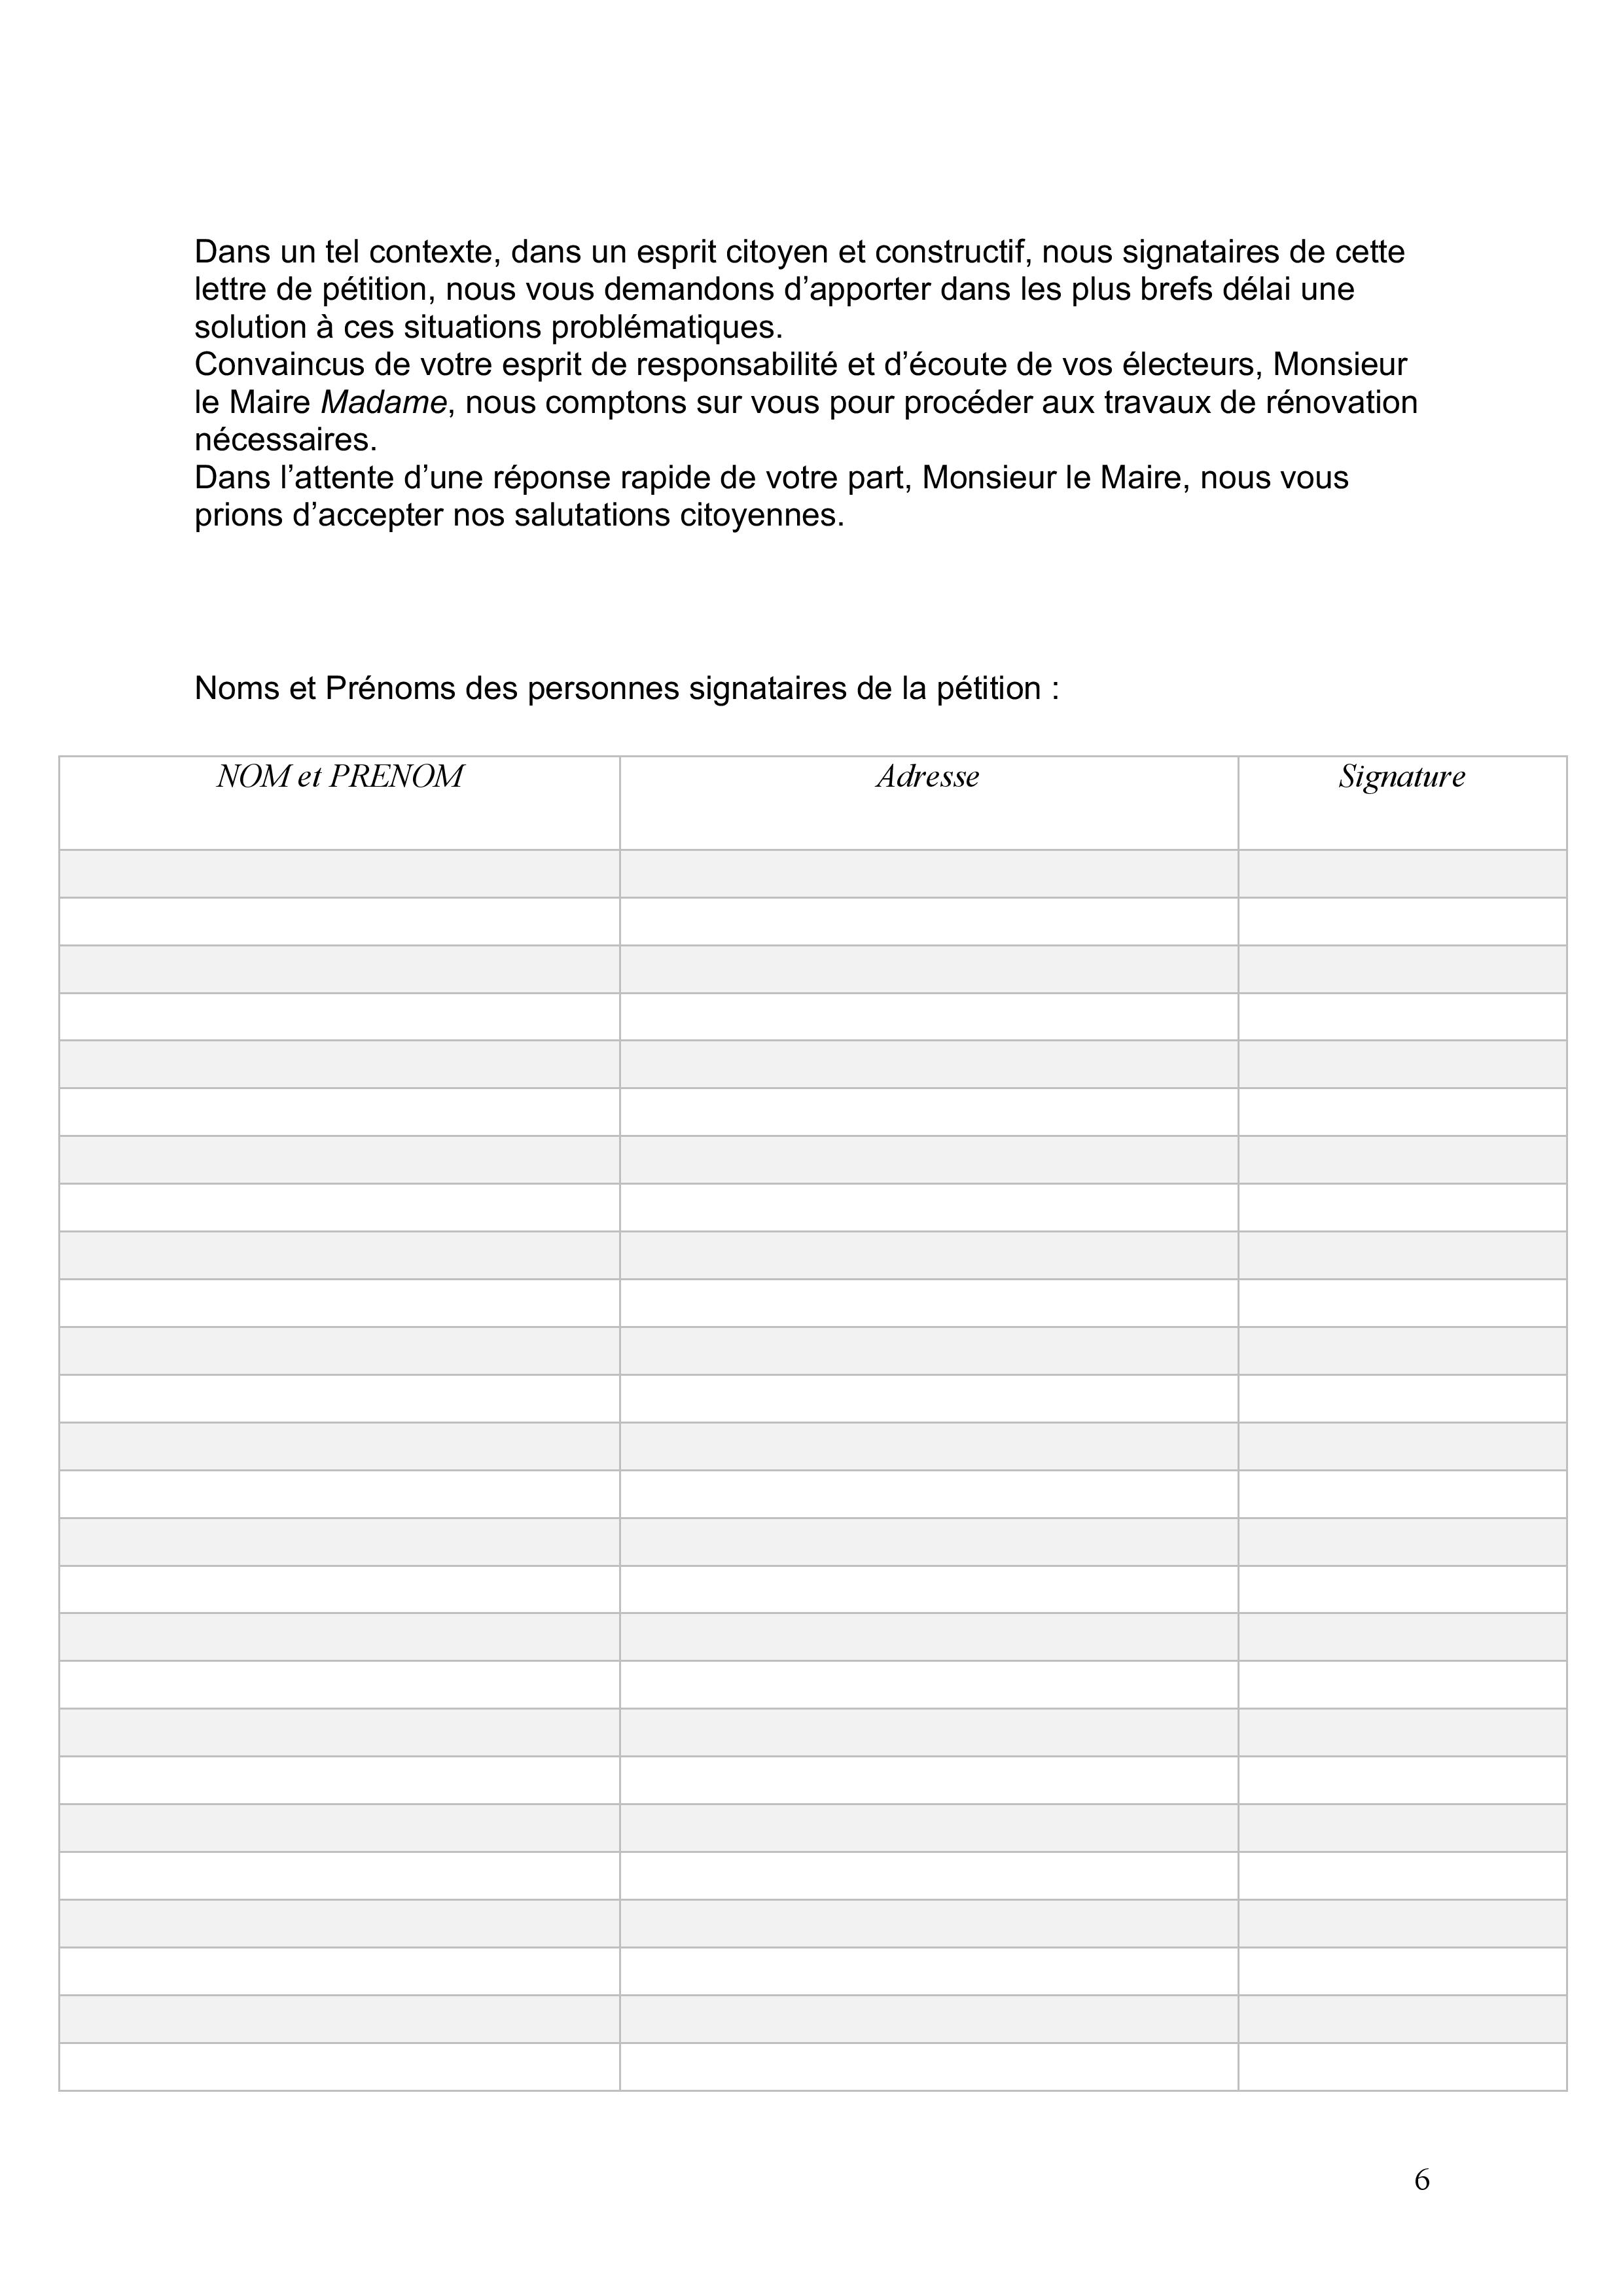 petition_castel_2021-page-006.jpg